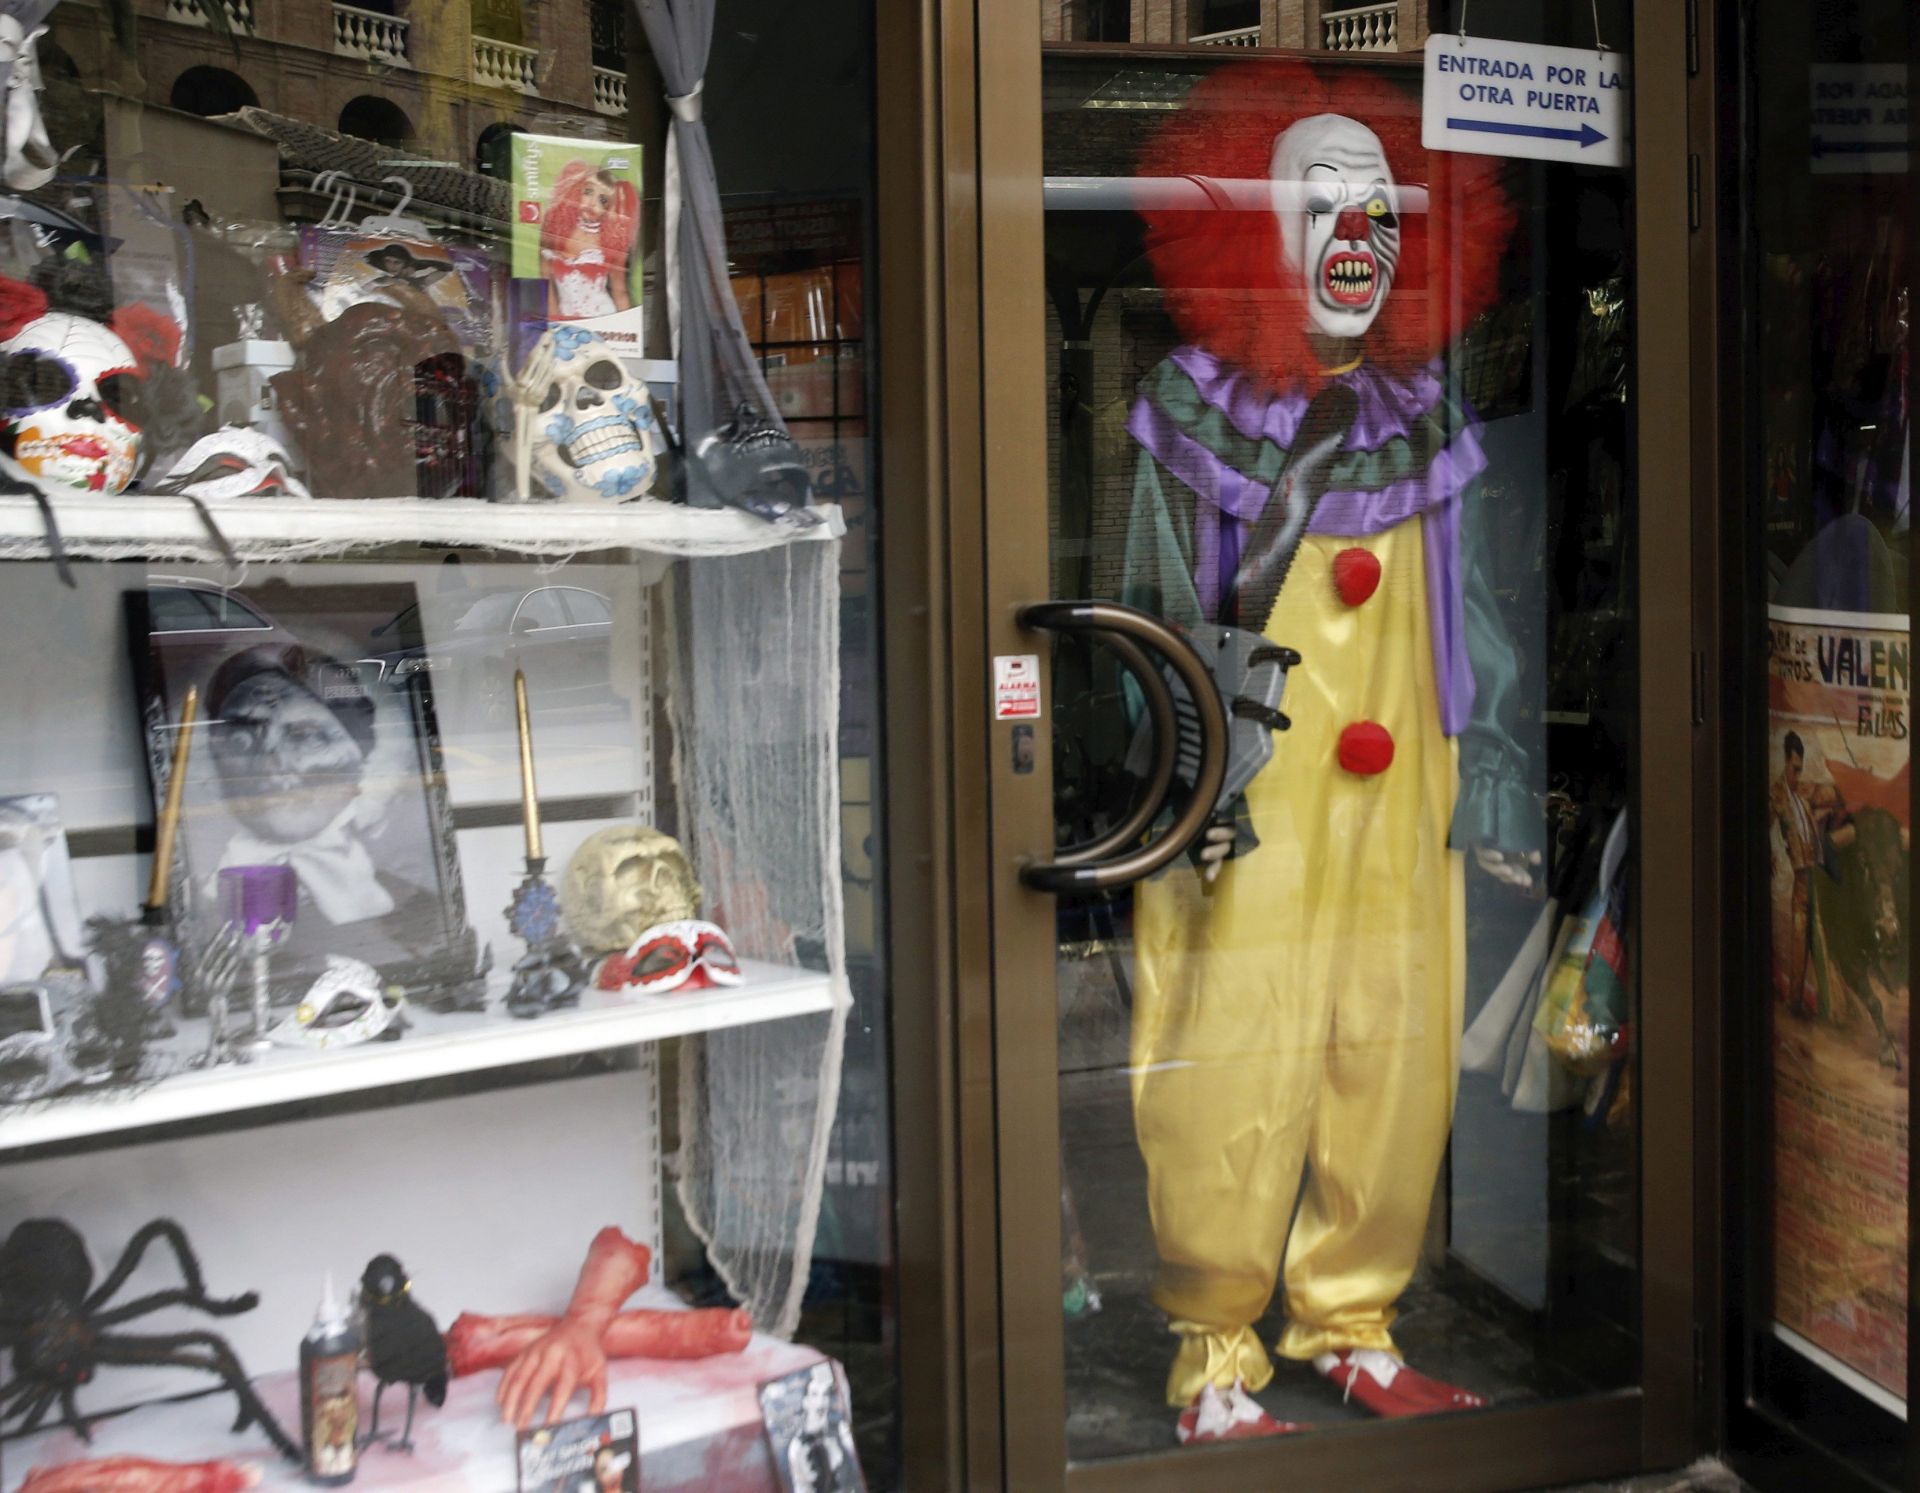 epa05603653 A creepy clown costume is displayed in a fancy-dress shop in Valencia, Spain, 26 October 2016. Authorities of the City Hall of Paterna, asked the residents to keep calm after several persons, dressed up as creepy clowns, scared some people.  EPA/JUAN CARLOS CARDENAS